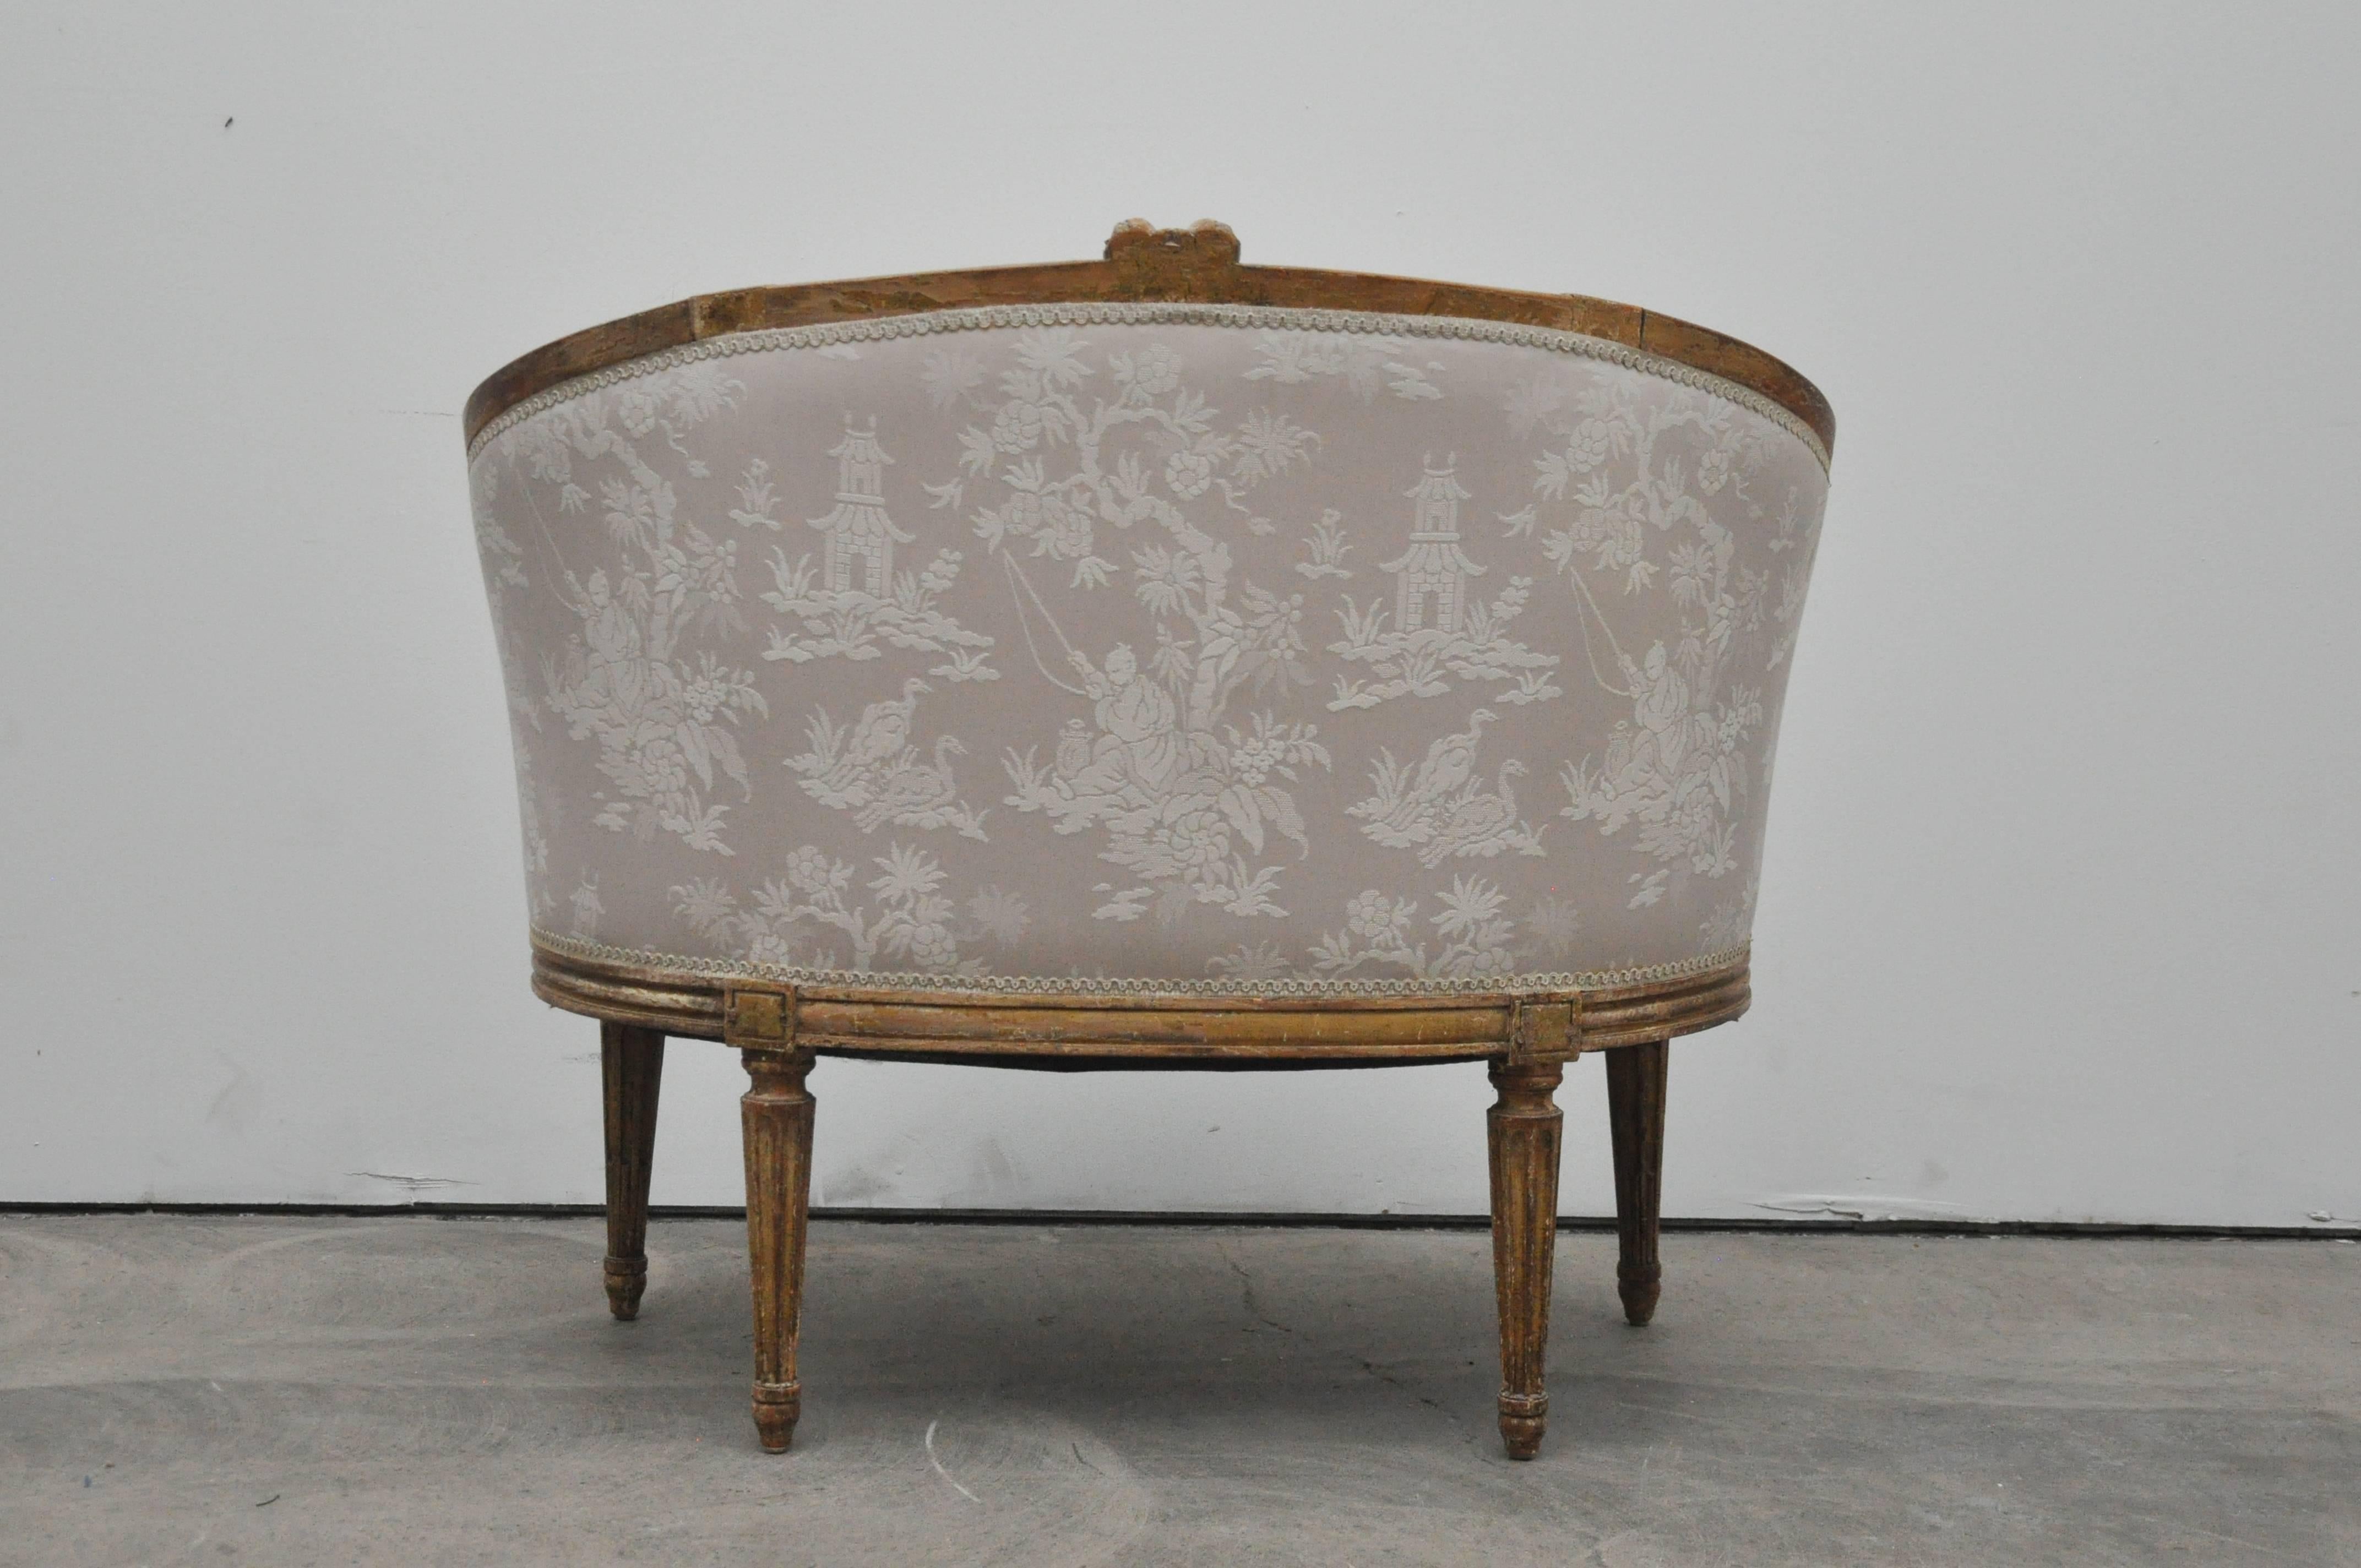 Petite French settee or canape. Nicely upholstered in chinoiserie fabric.